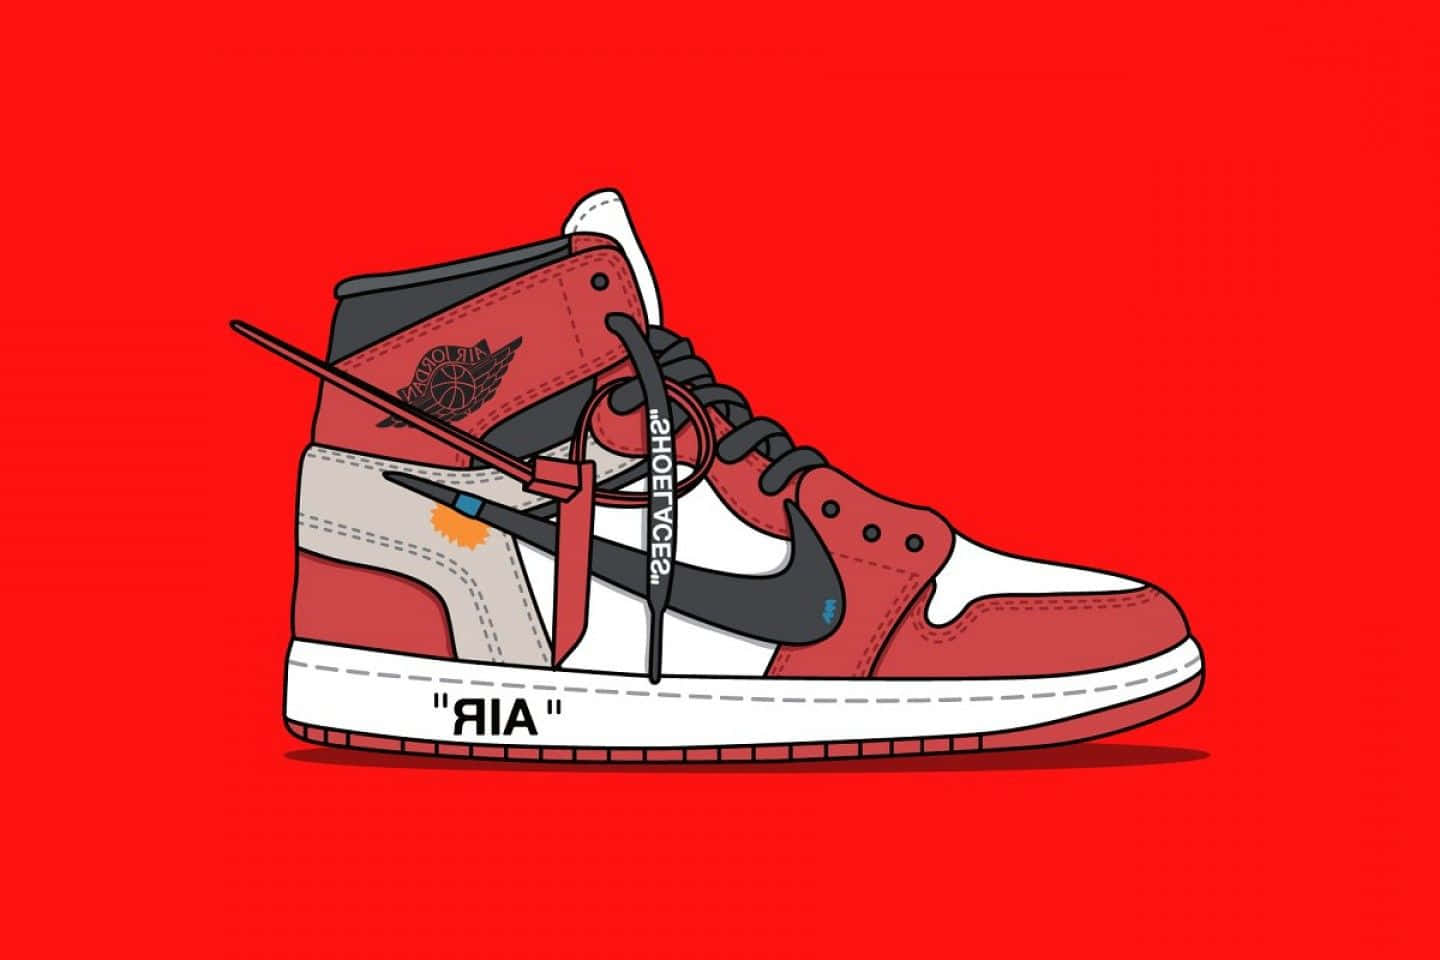 Take your sneaker game to the next level with the iconic Off White Jordan 1 Wallpaper